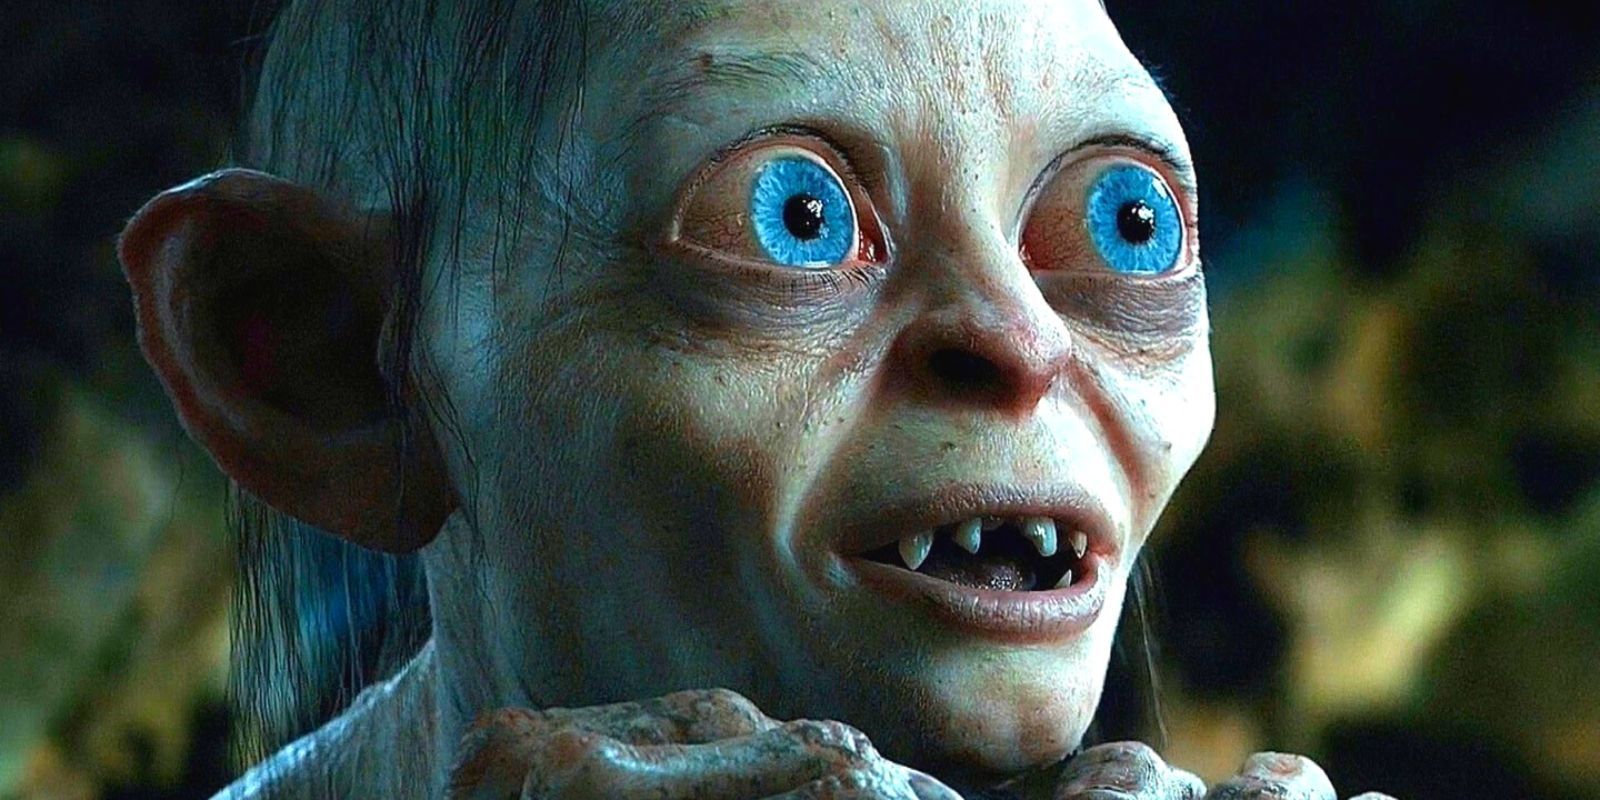 The Lord of the Rings' Gollum looking in awe.